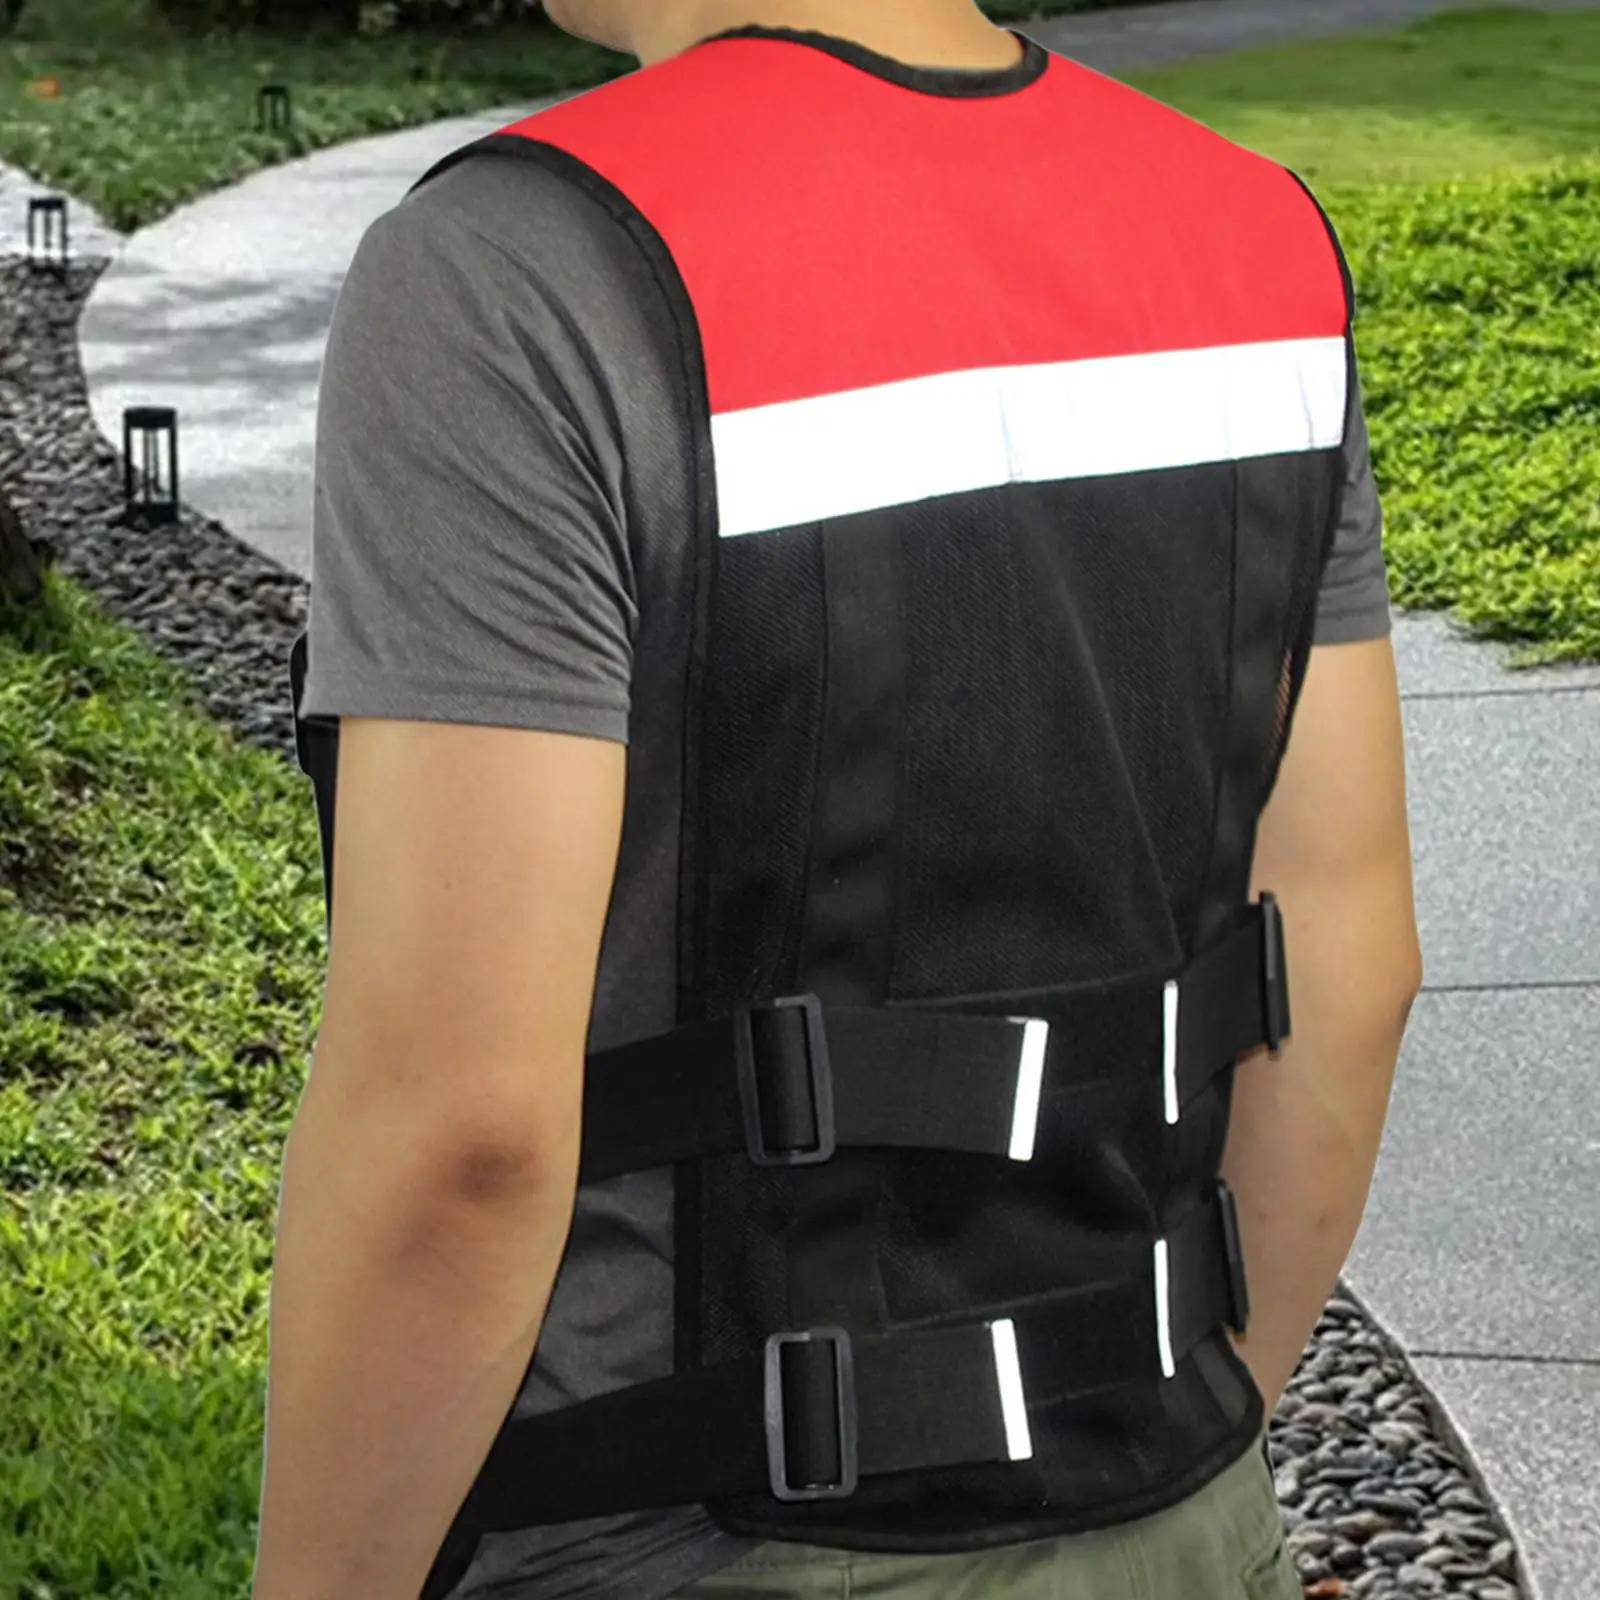 Reflective Safety Security Vest with Pockets Safety Clothing